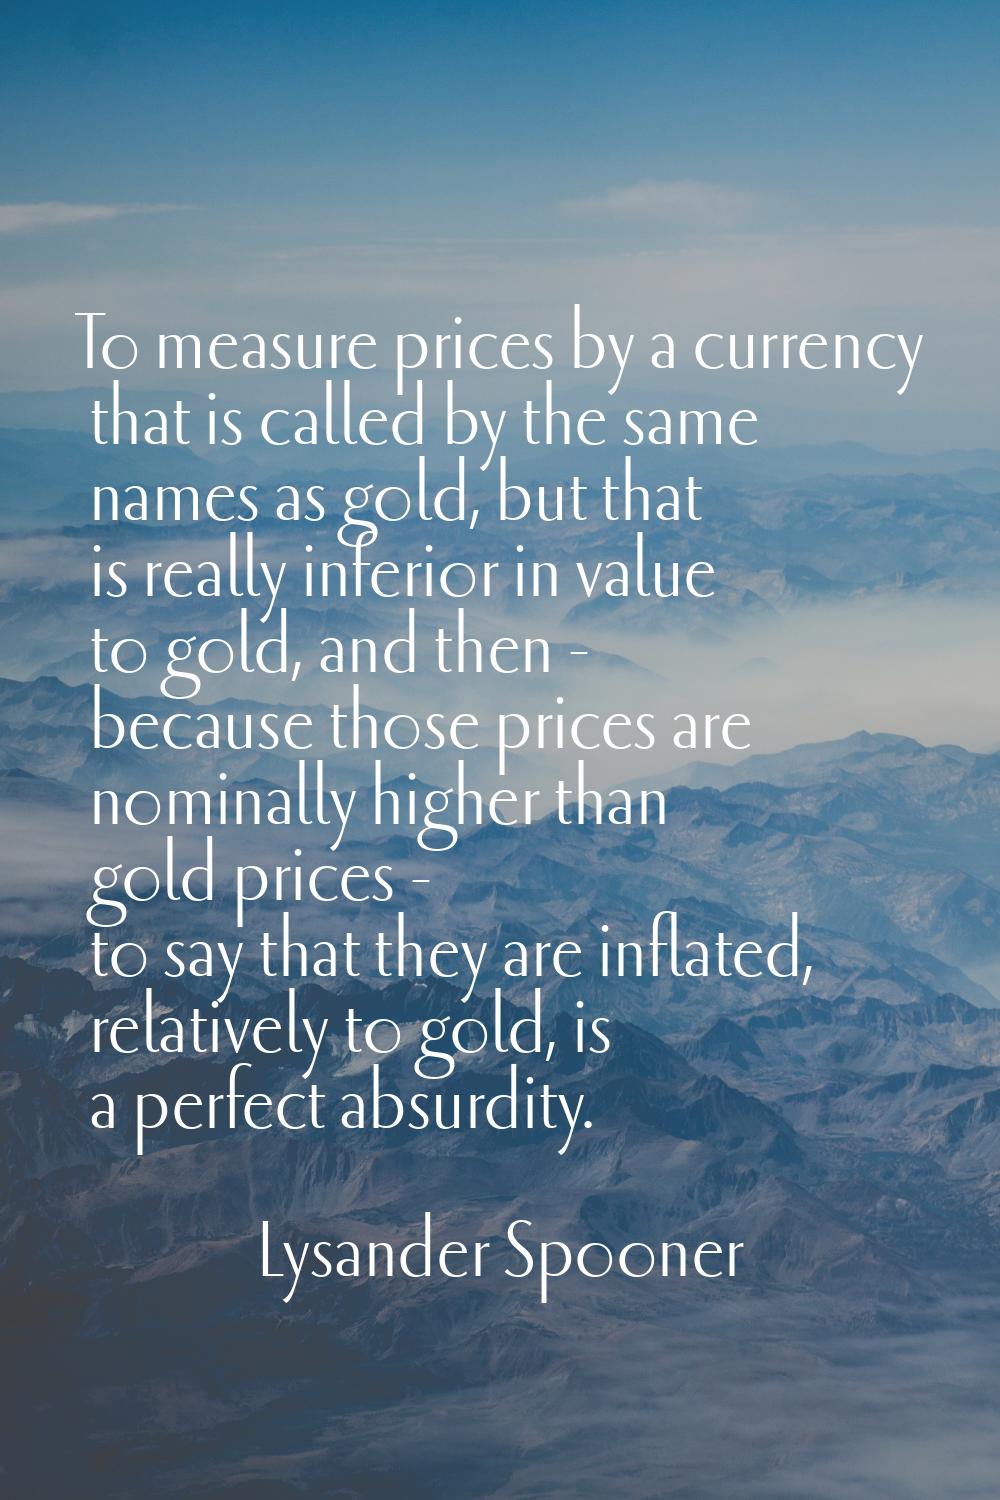 To measure prices by a currency that is called by the same names as gold, but that is really inferi